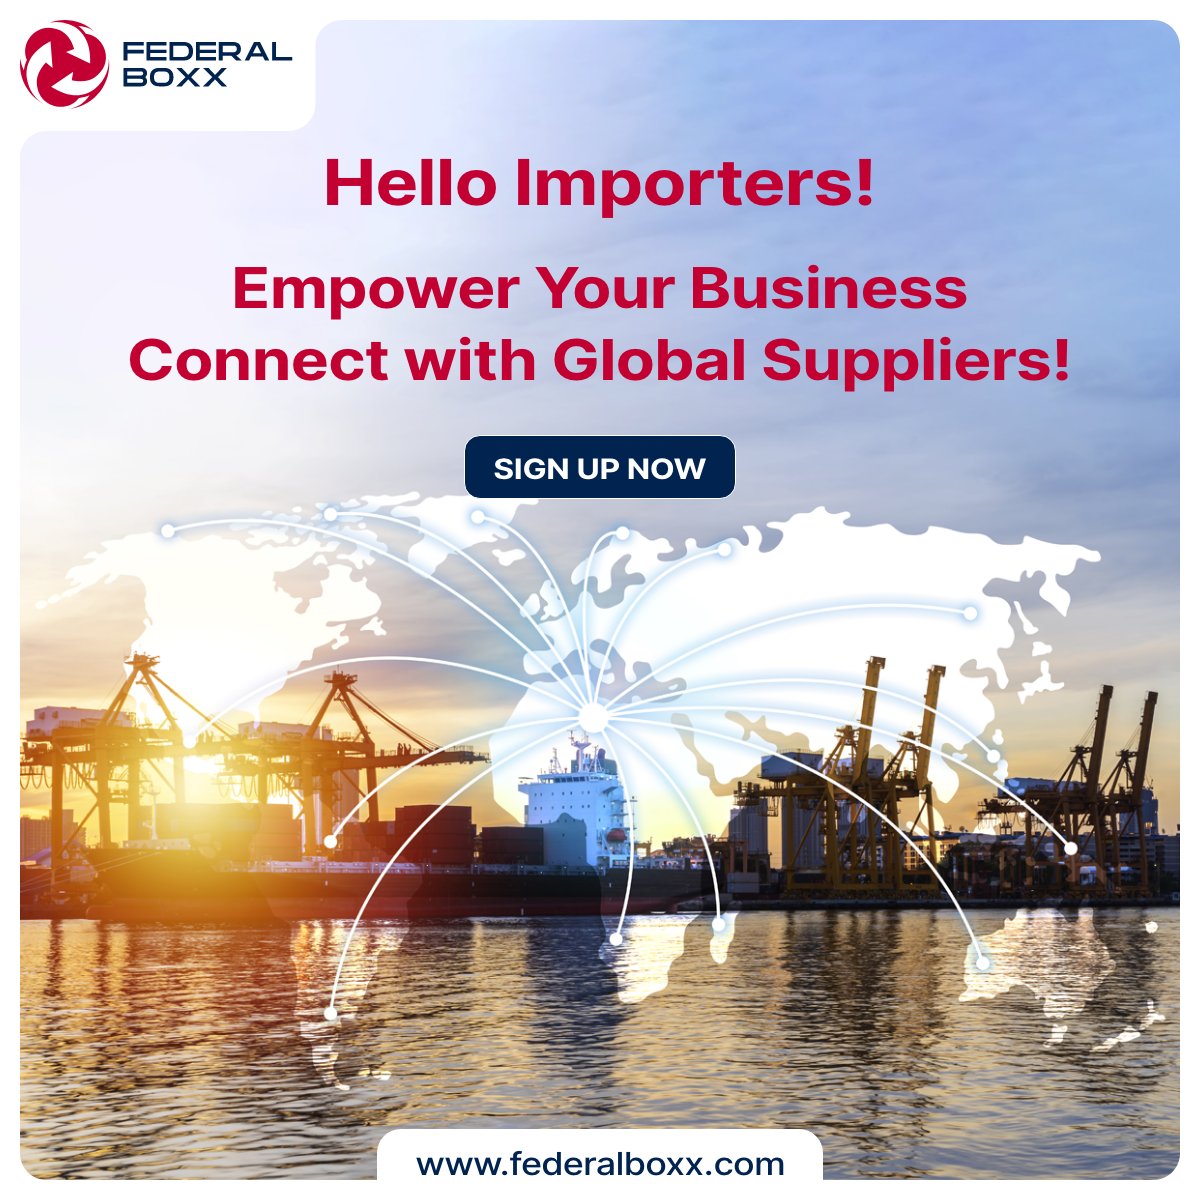 Hey Importers! Ready to empower your business? Connect with global suppliers and expand your network with FederalBoxx! Sign up now to access a world of opportunities. #Importers #GlobalSuppliers #BusinessNetworking #Procurement #GlobalTrade